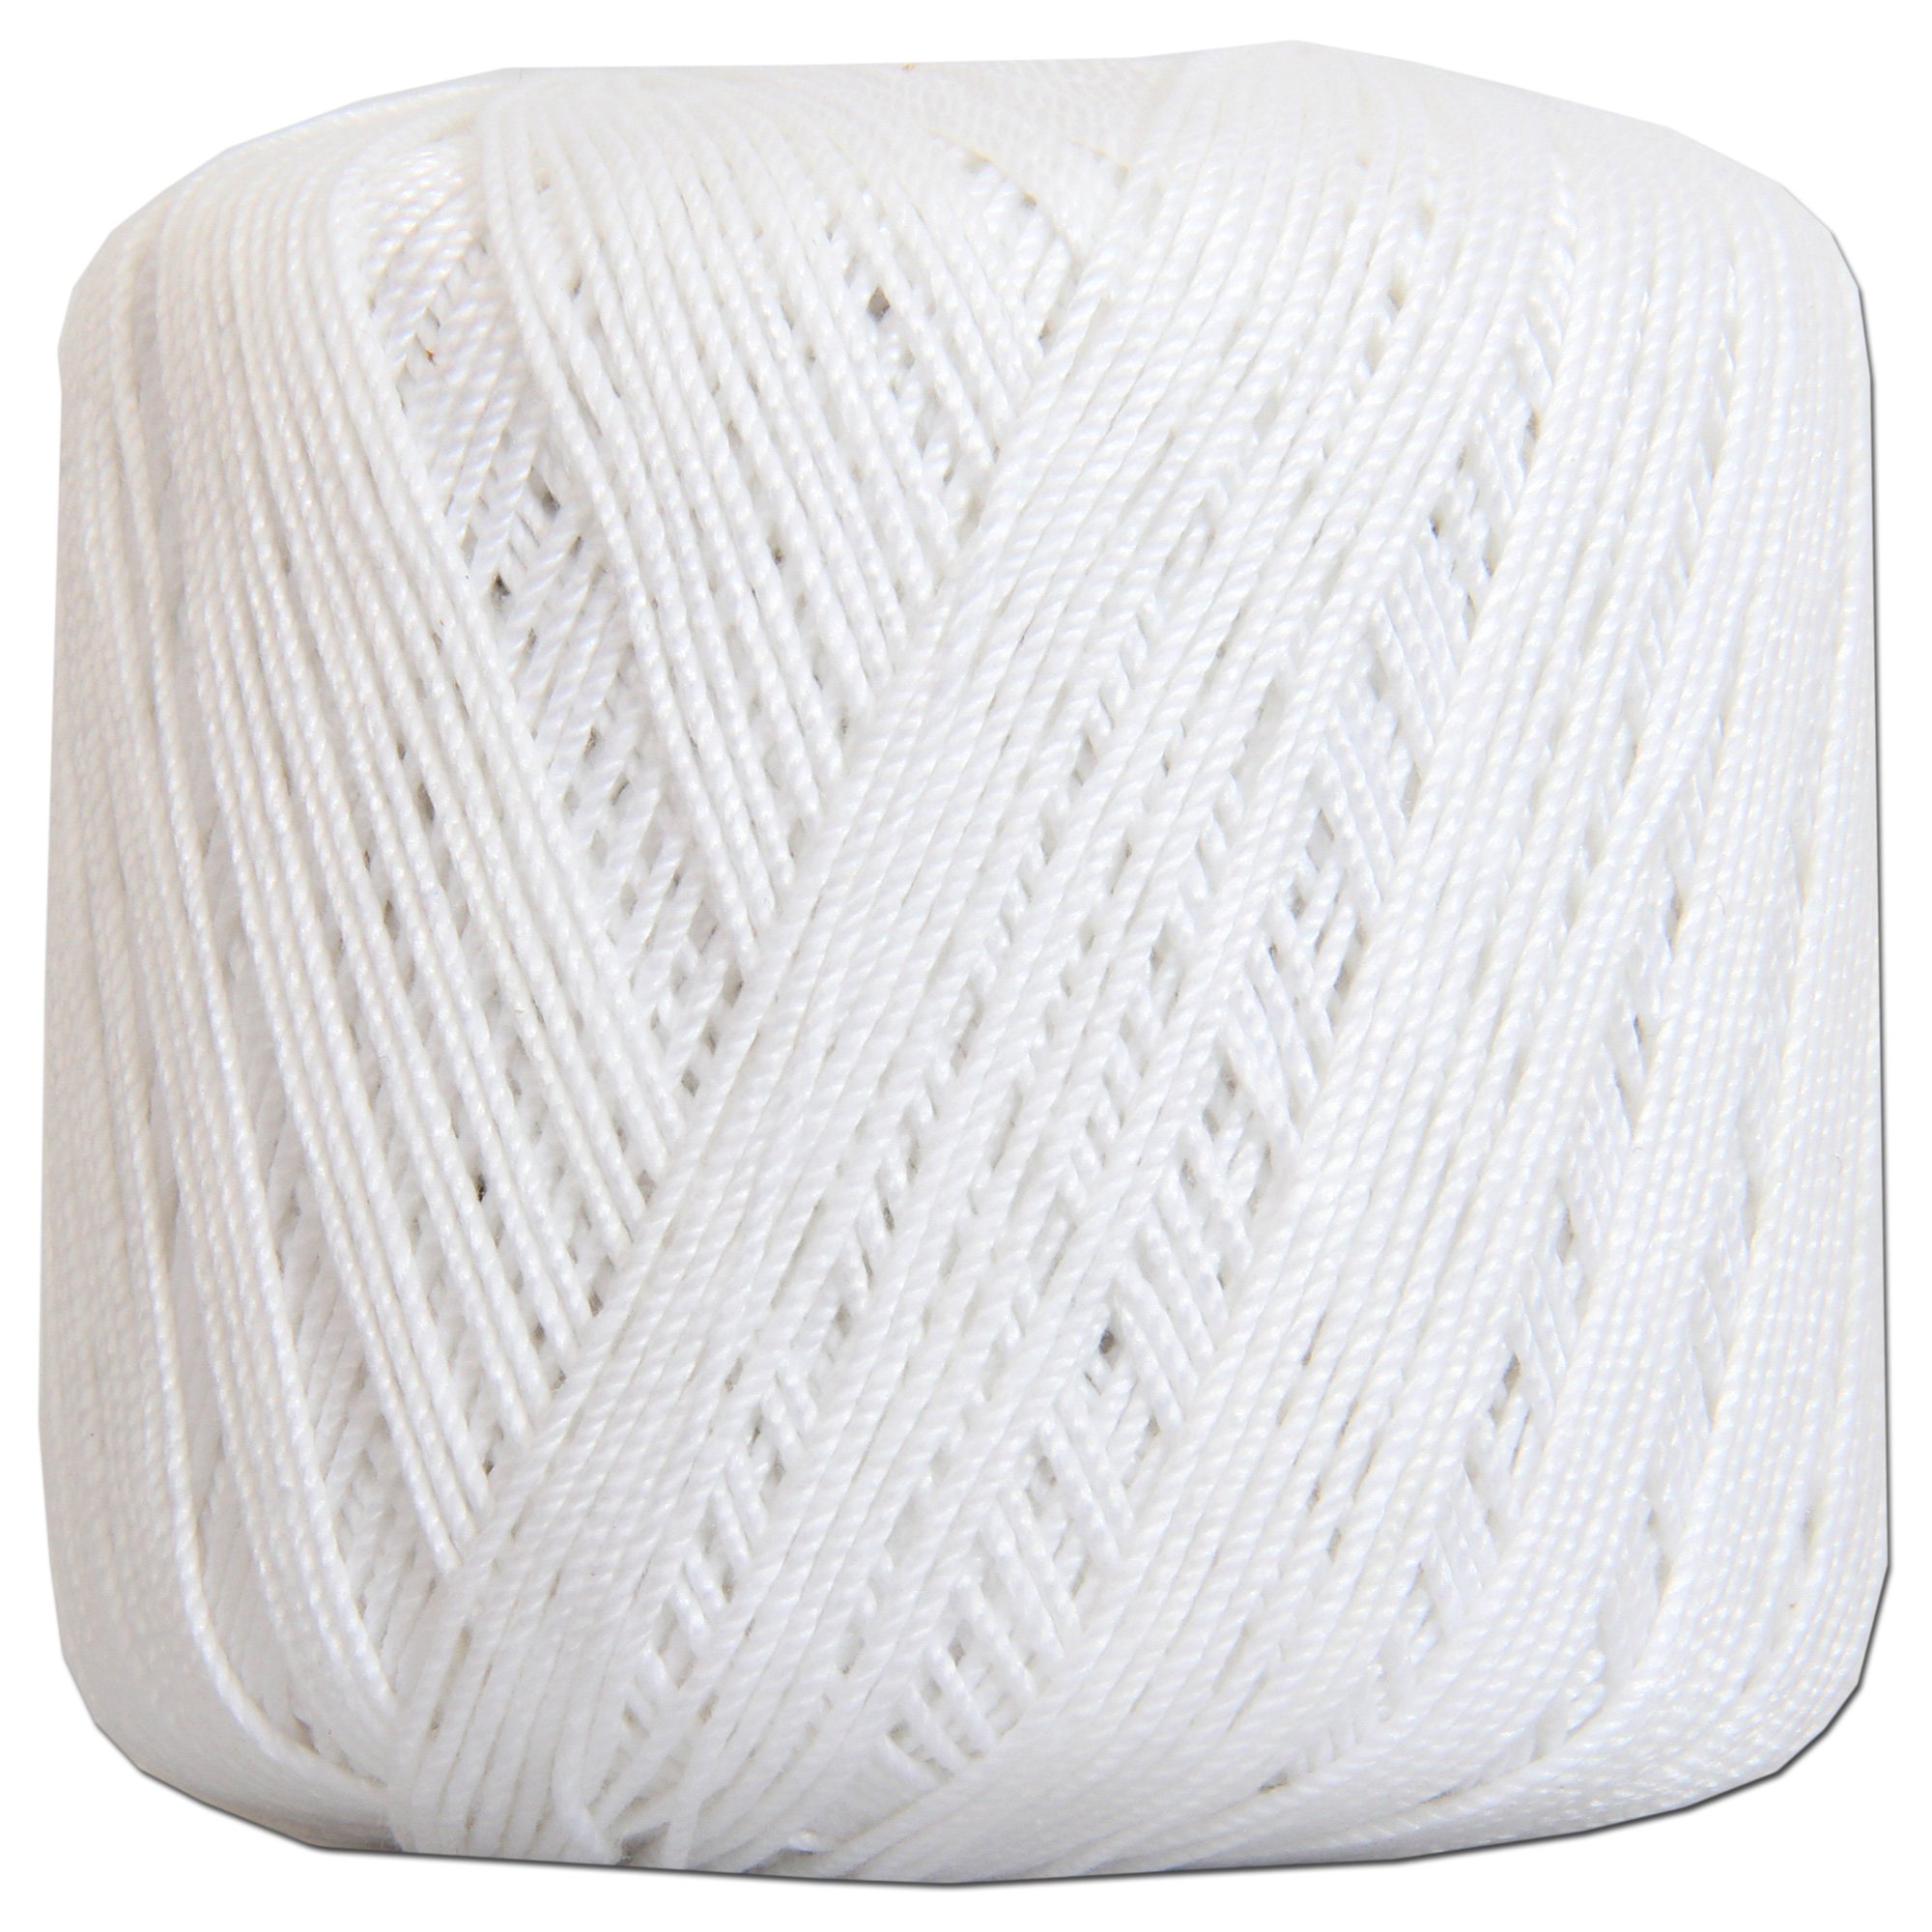 Threadart 100 Pure Cotton Crochet Thread - Size 3 - Color 1 - White - Size 10 And 3 - Singles And Bulk Packs Available